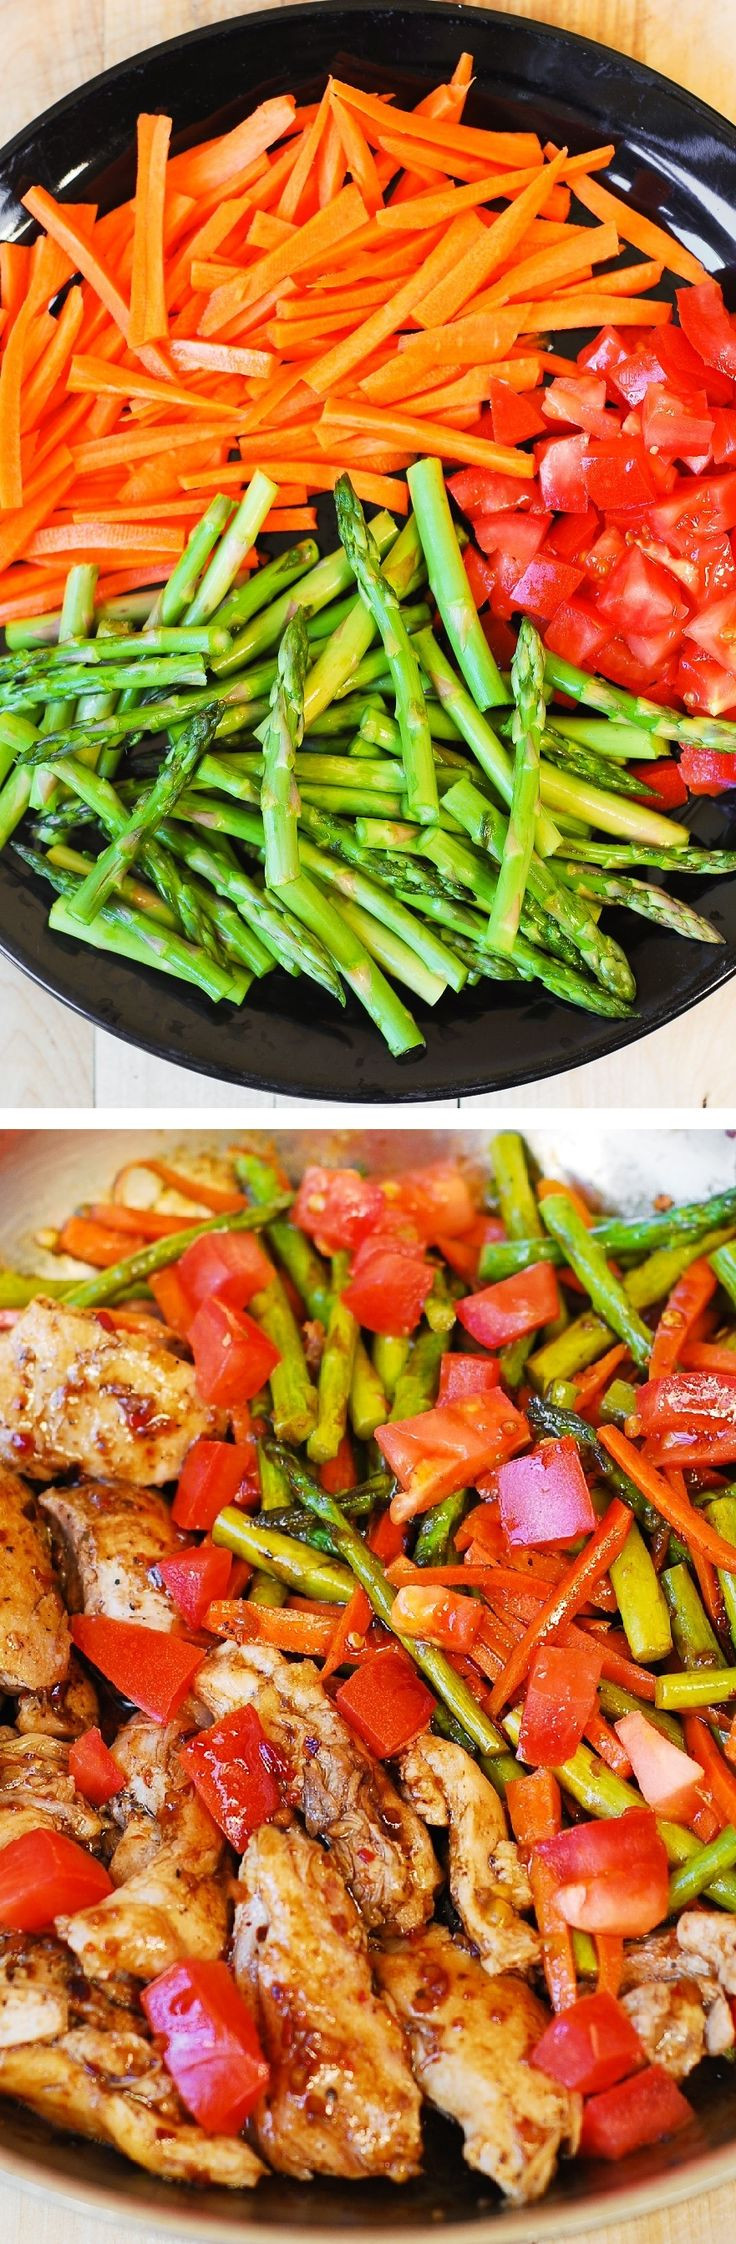 Low Cholesterol Recipes For Dinner
 175 best images about low or no salt recipes on Pinterest